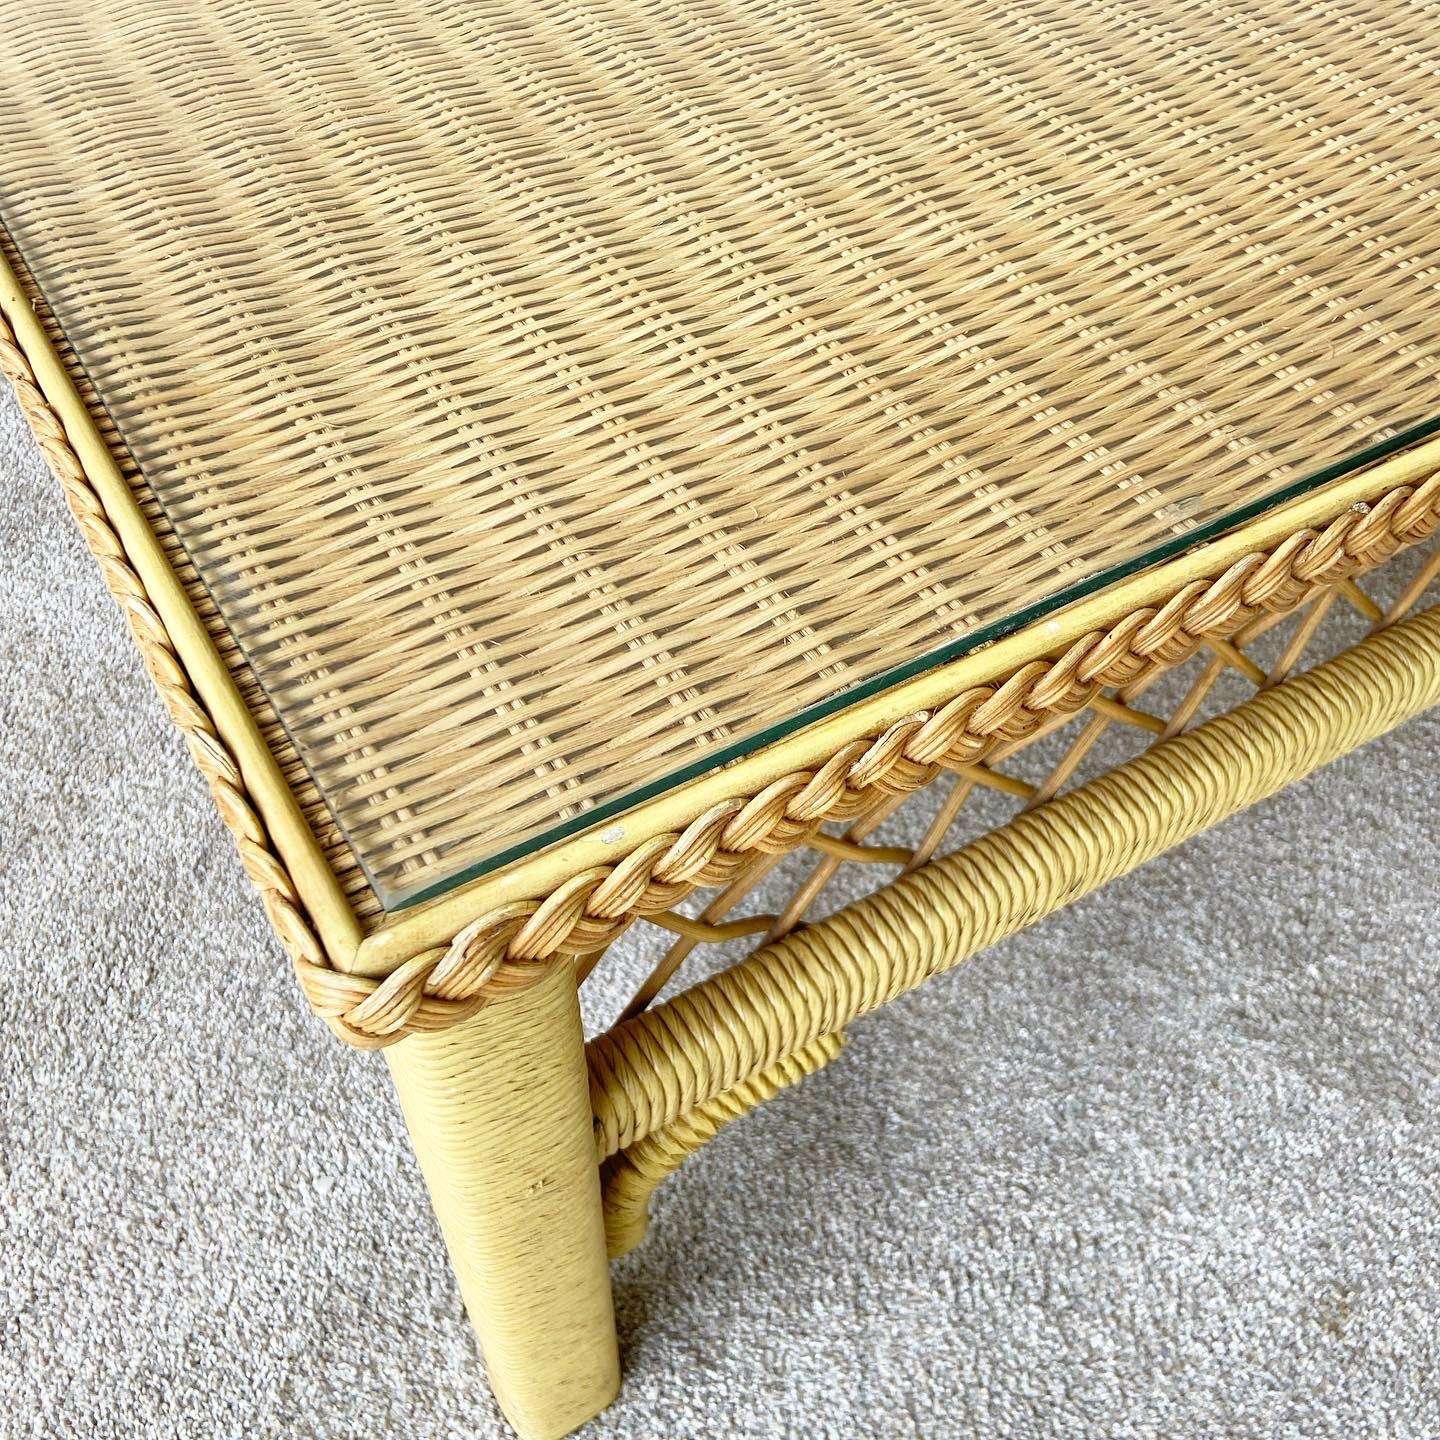 Late 20th Century Boho Chic Wicker and Rattan Coffee Table With Glass Top by Henry Link For Sale